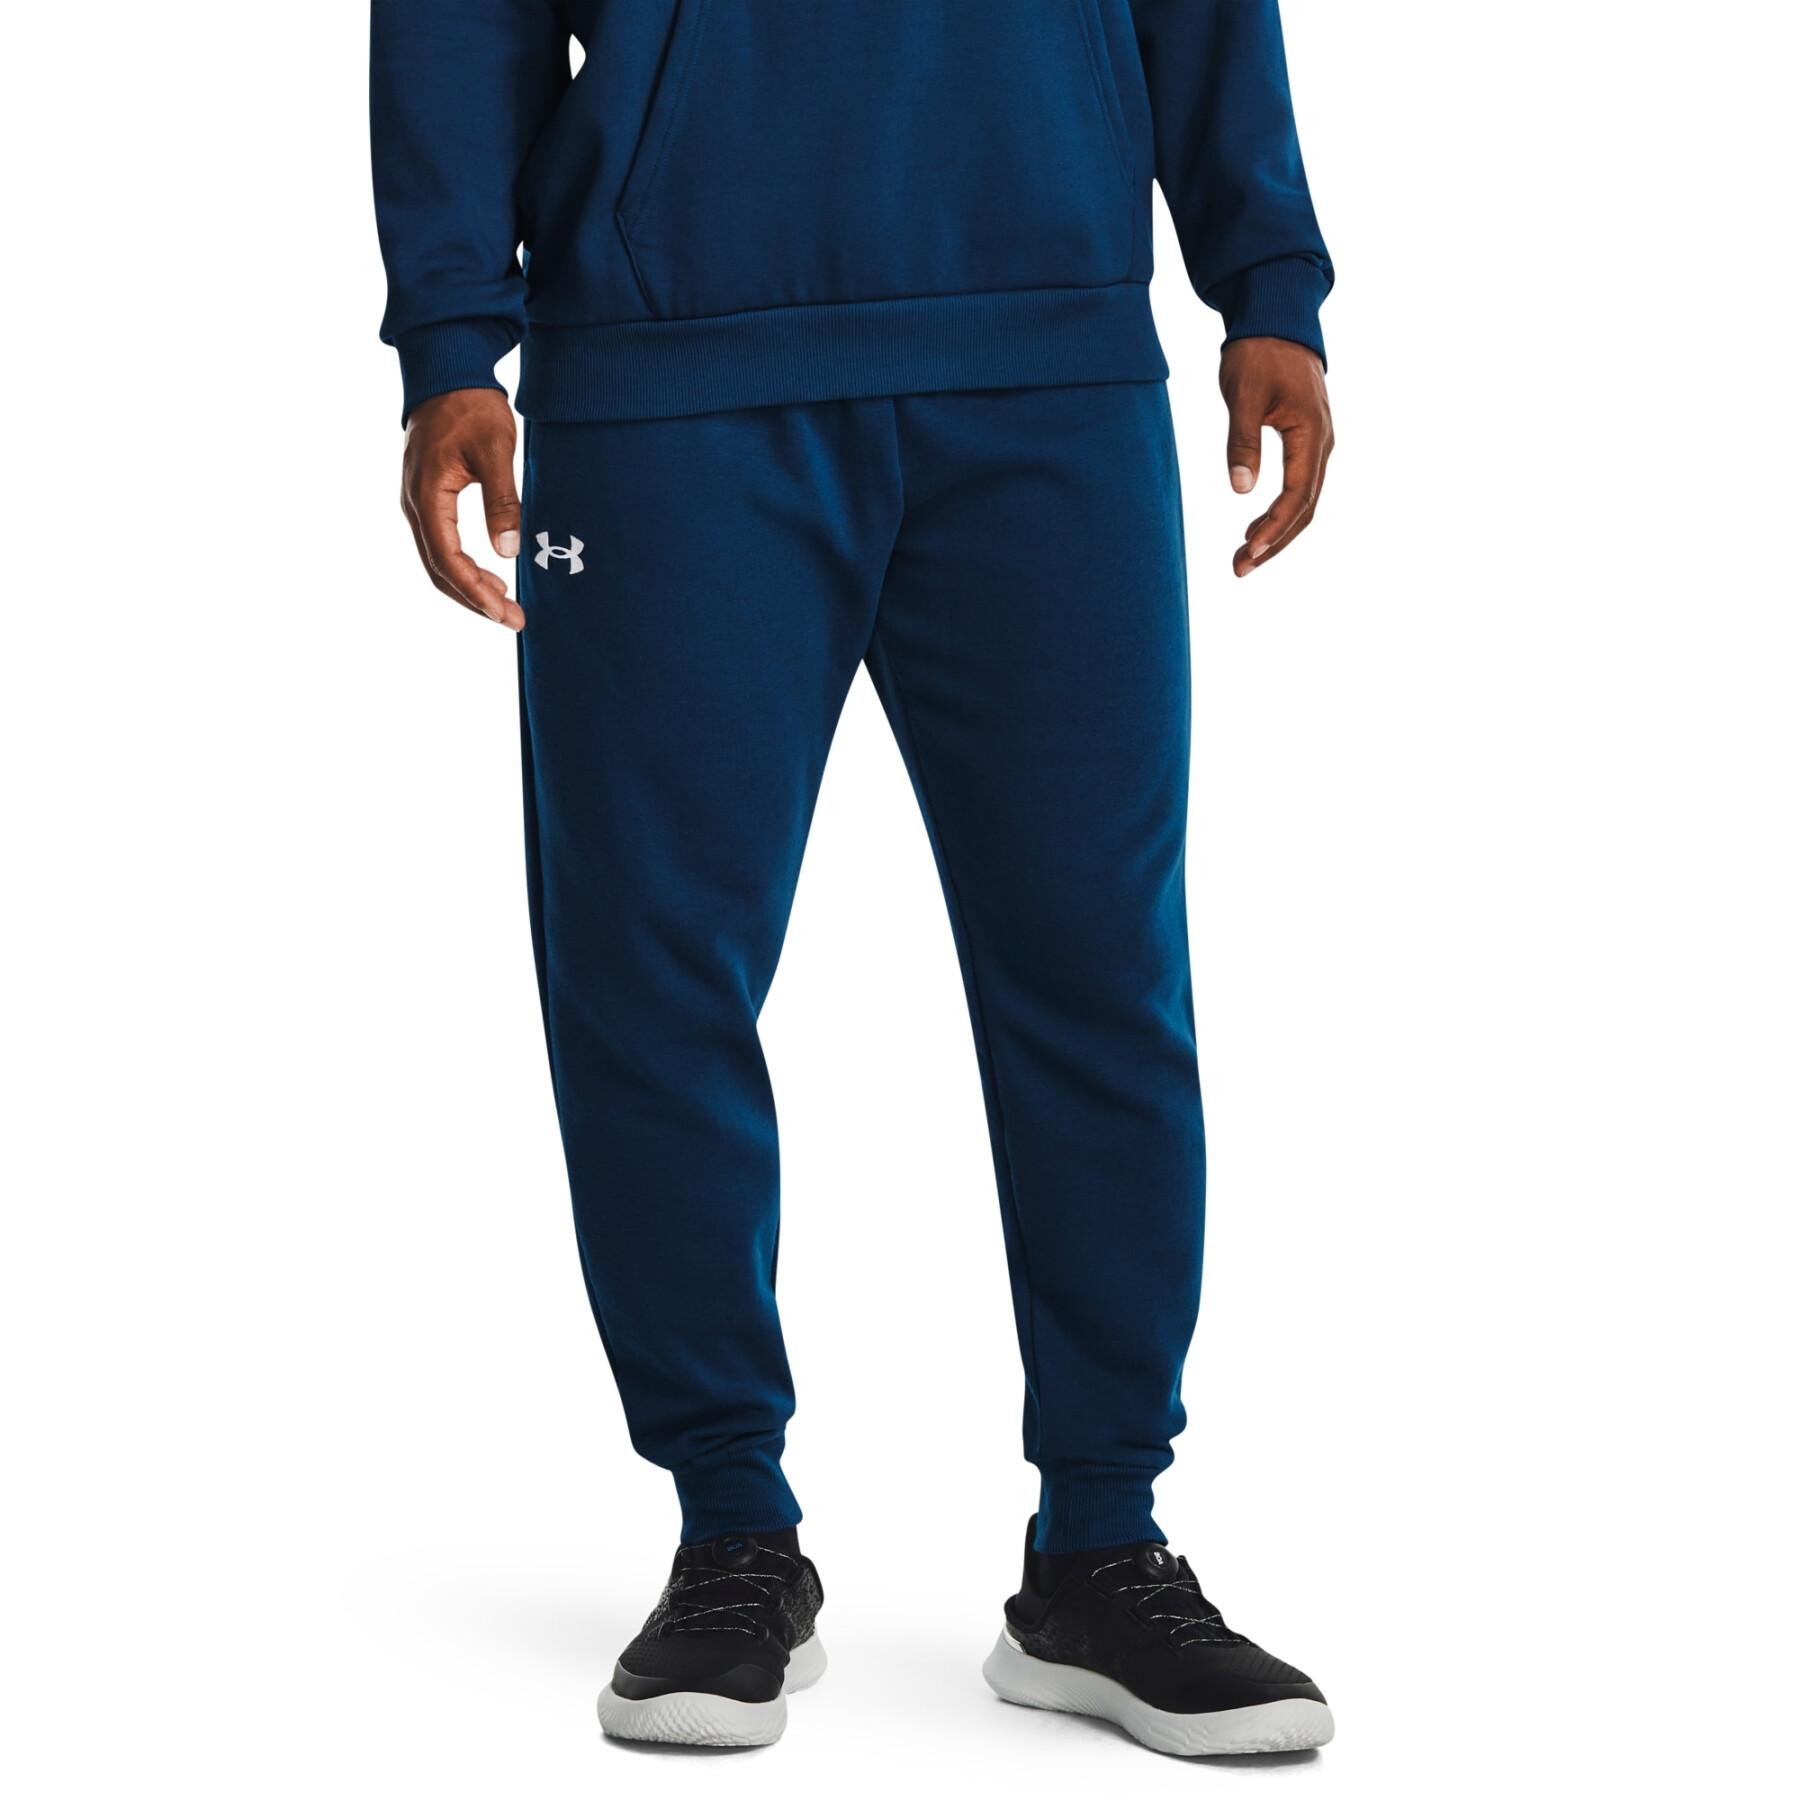 Jogging Under Armour Fleece - Mens Jogging Stockings Clothing - / Rival suits - Pants The